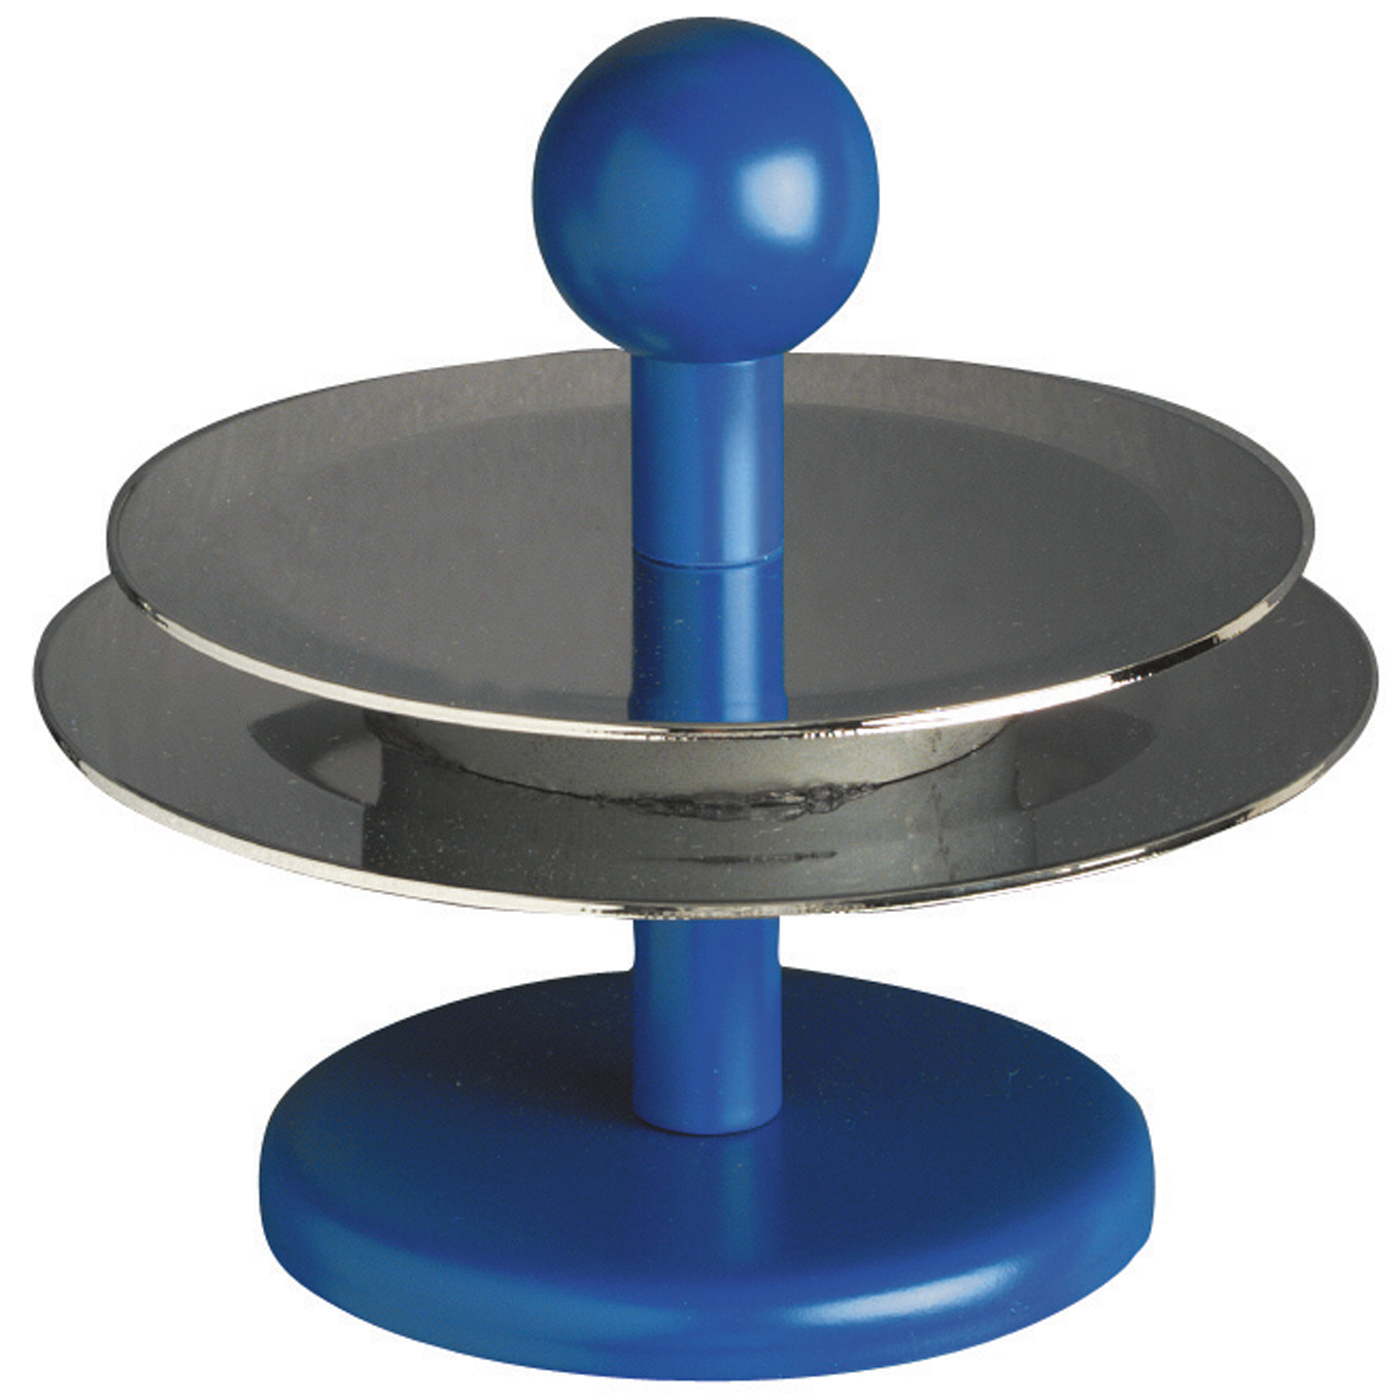 FINO Magnetic Stand, Blue - 1 piece